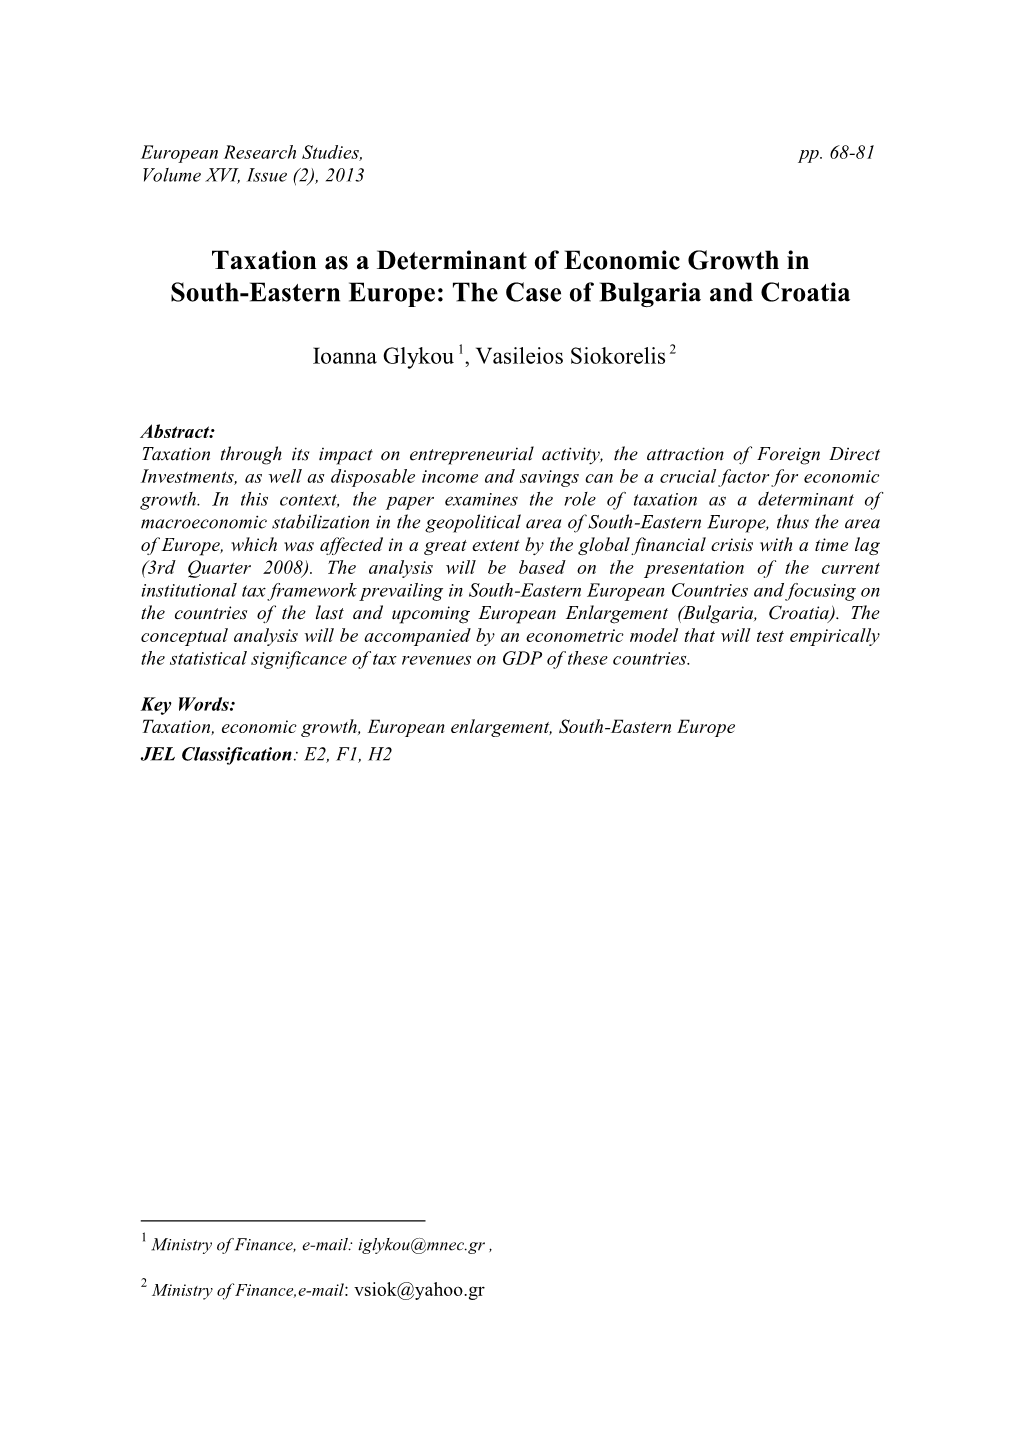 Taxation As a Determinant of Economic Growth in South-Eastern Europe: the Case of Bulgaria and Croatia